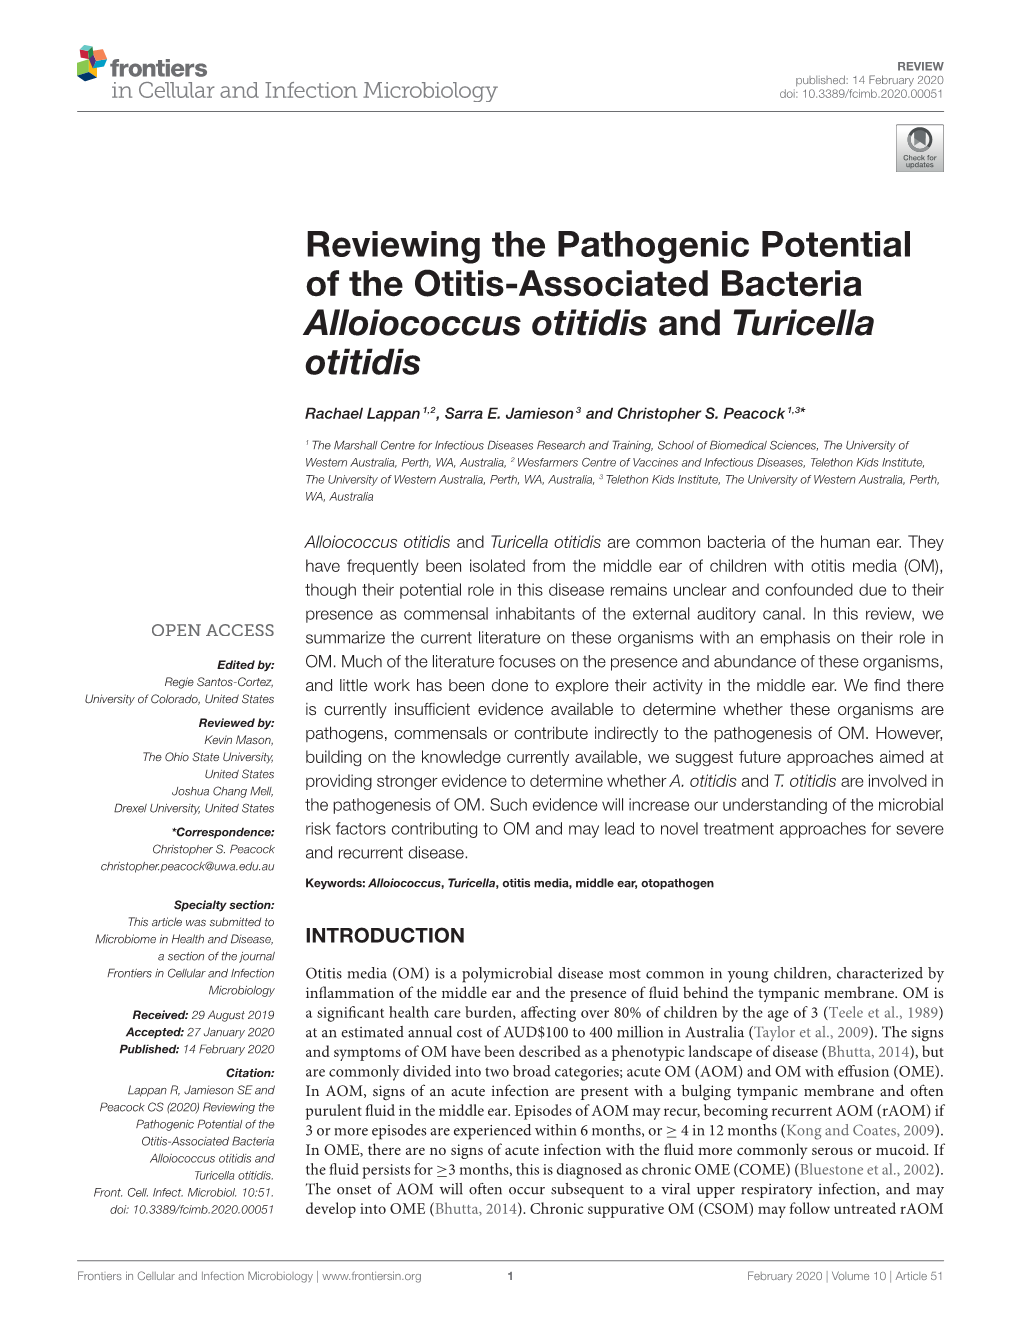 Reviewing the Pathogenic Potential of the Otitis-Associated Bacteria Alloiococcus Otitidis and Turicella Otitidis